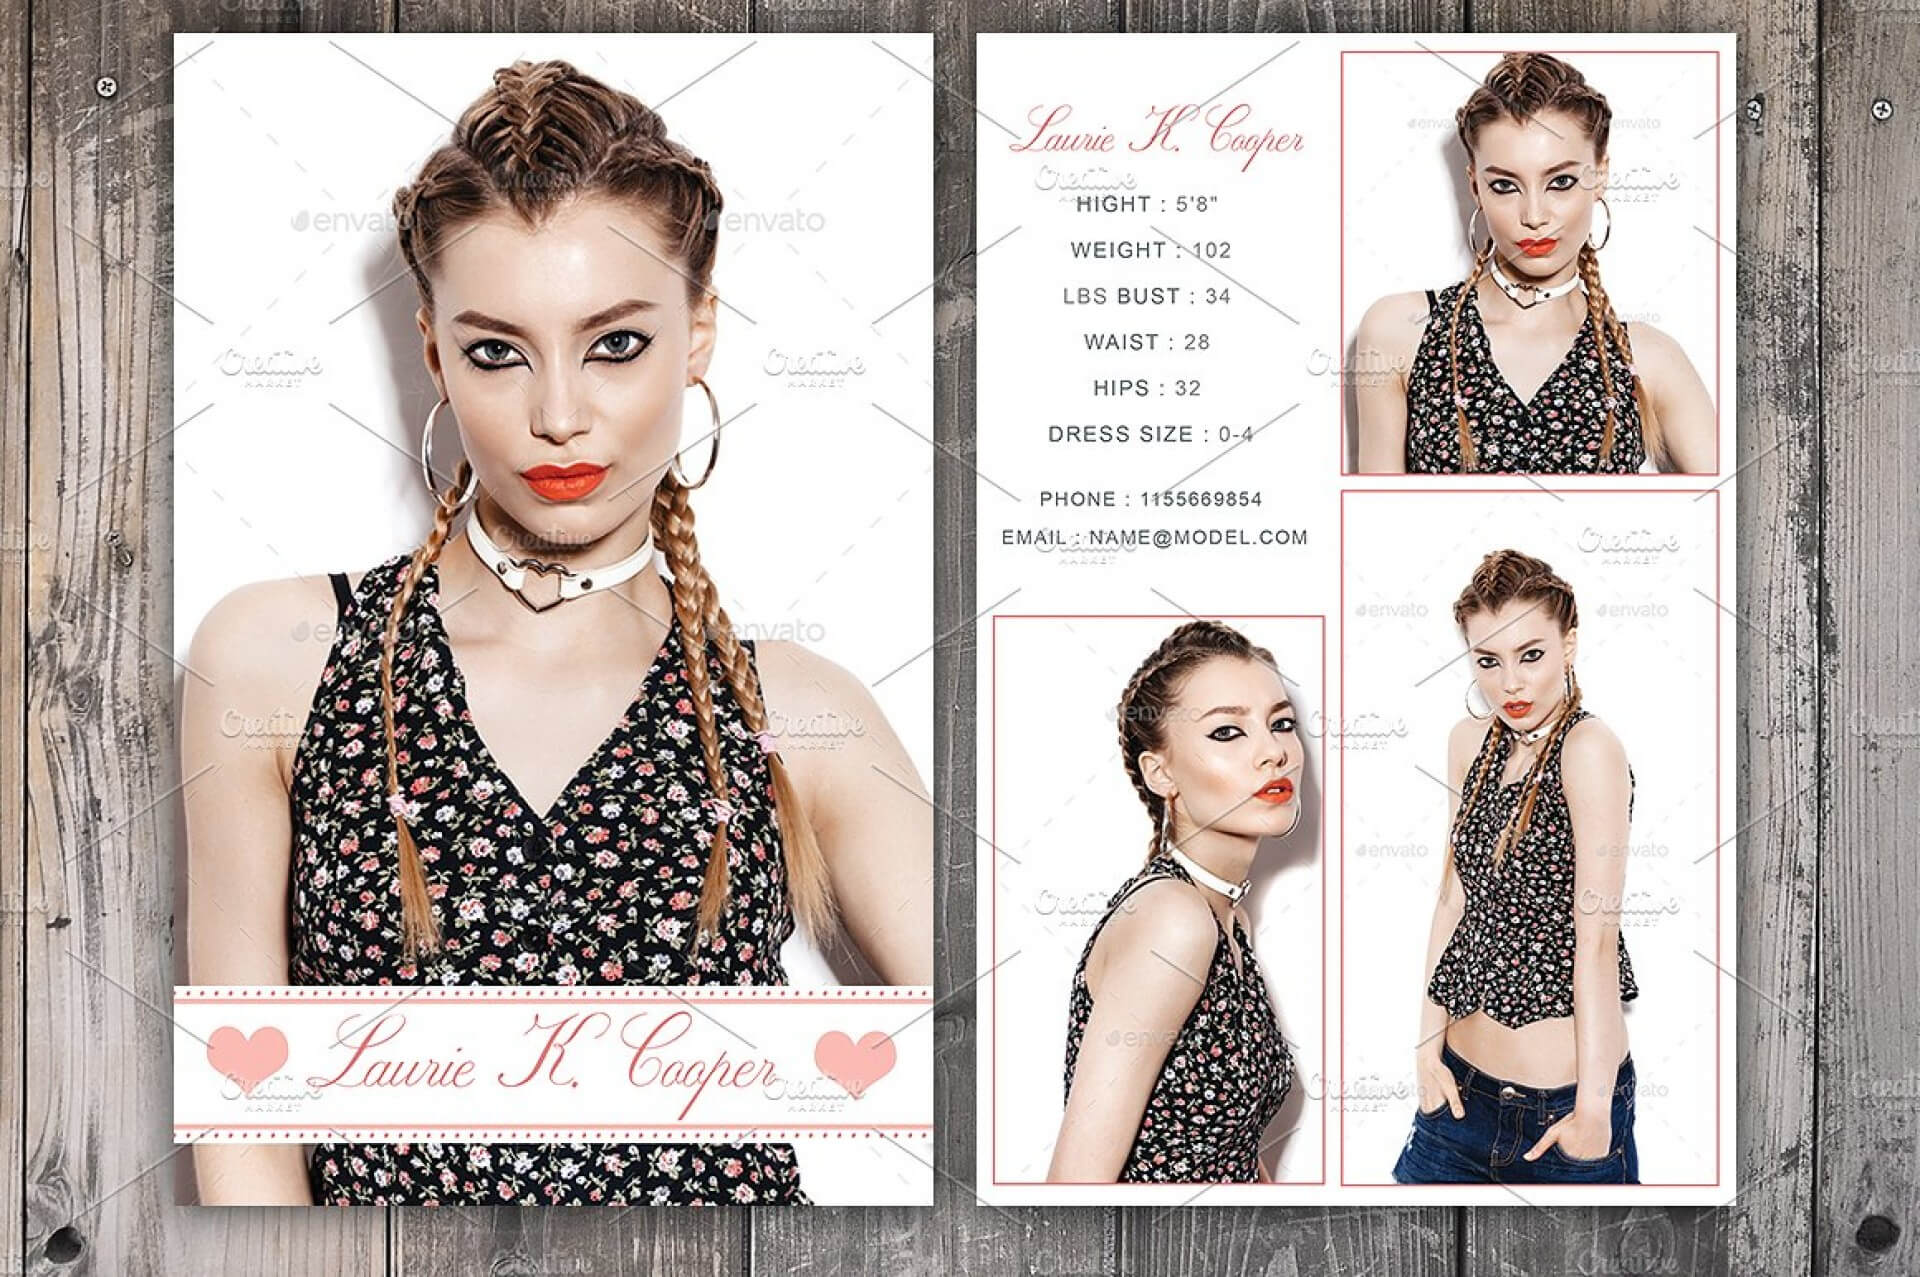 Free Comp Card Template Brochure Templates For Mac Photoshop Within Free Model Comp Card Template Psd